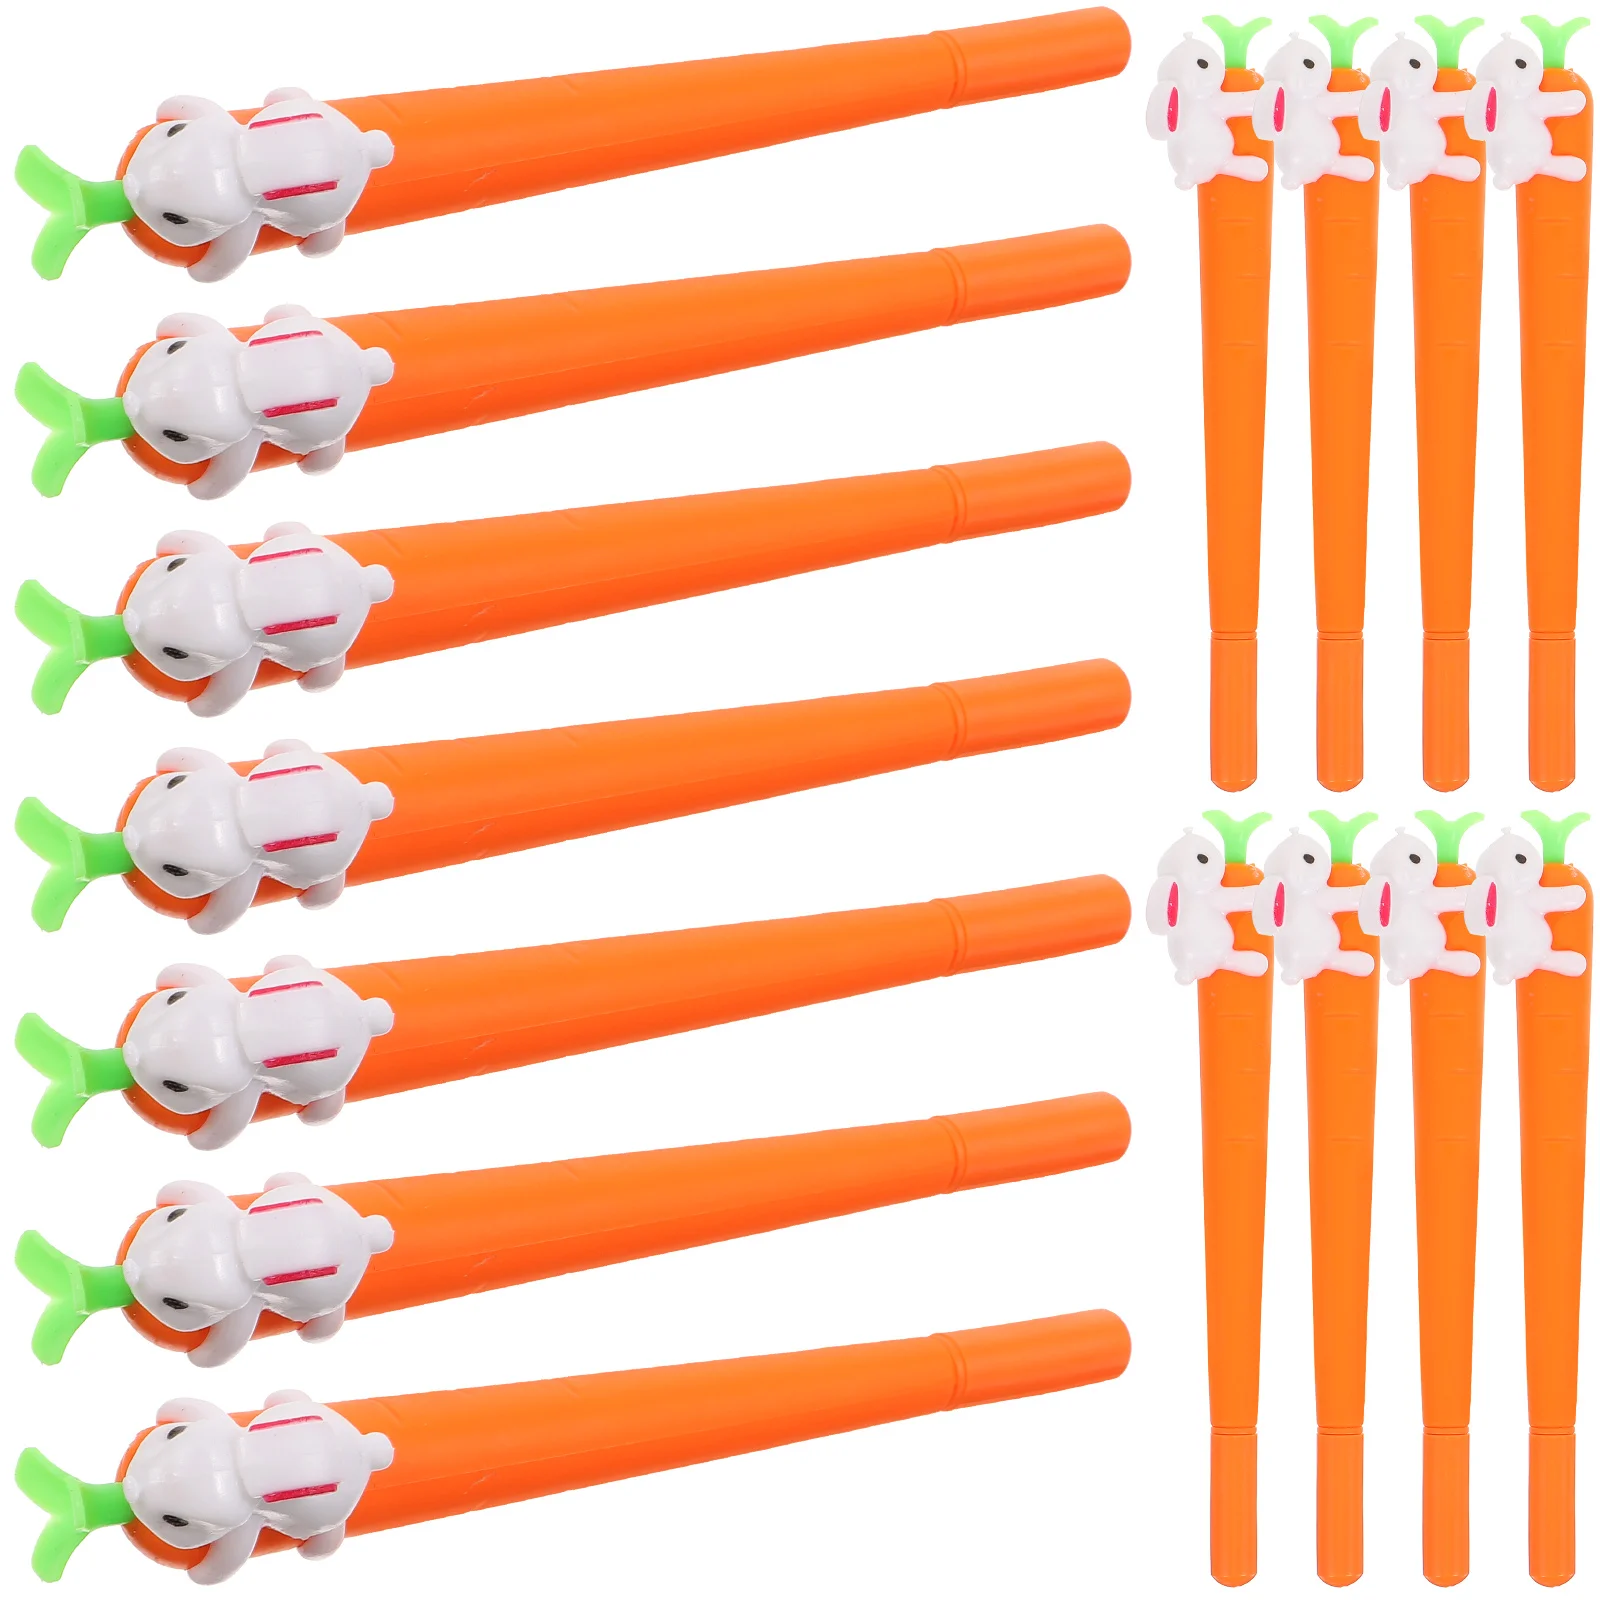 15 Pcs Carrot Pen Carrots Rabbit Pattern Stationery Gel Writing Silica Ink Shape Pens Student 05mm 10 pcs prize carrot pen student gifts ballpoint pen for kids silica gel sign pens